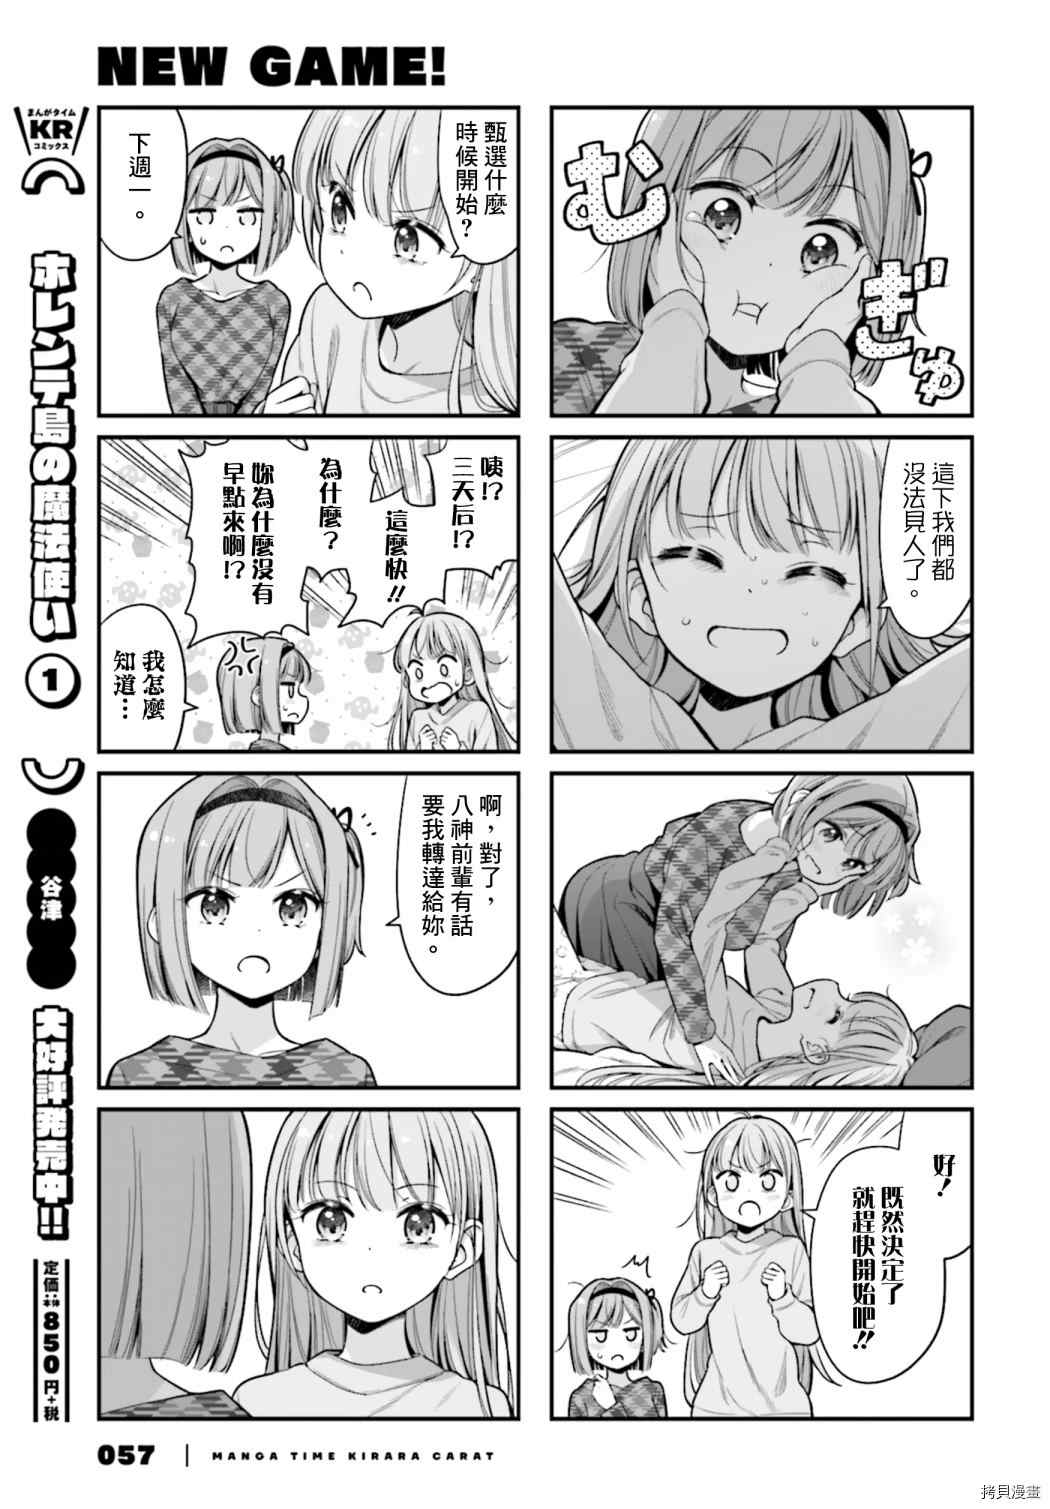 NEW GAME! - 143 第143話 - 1